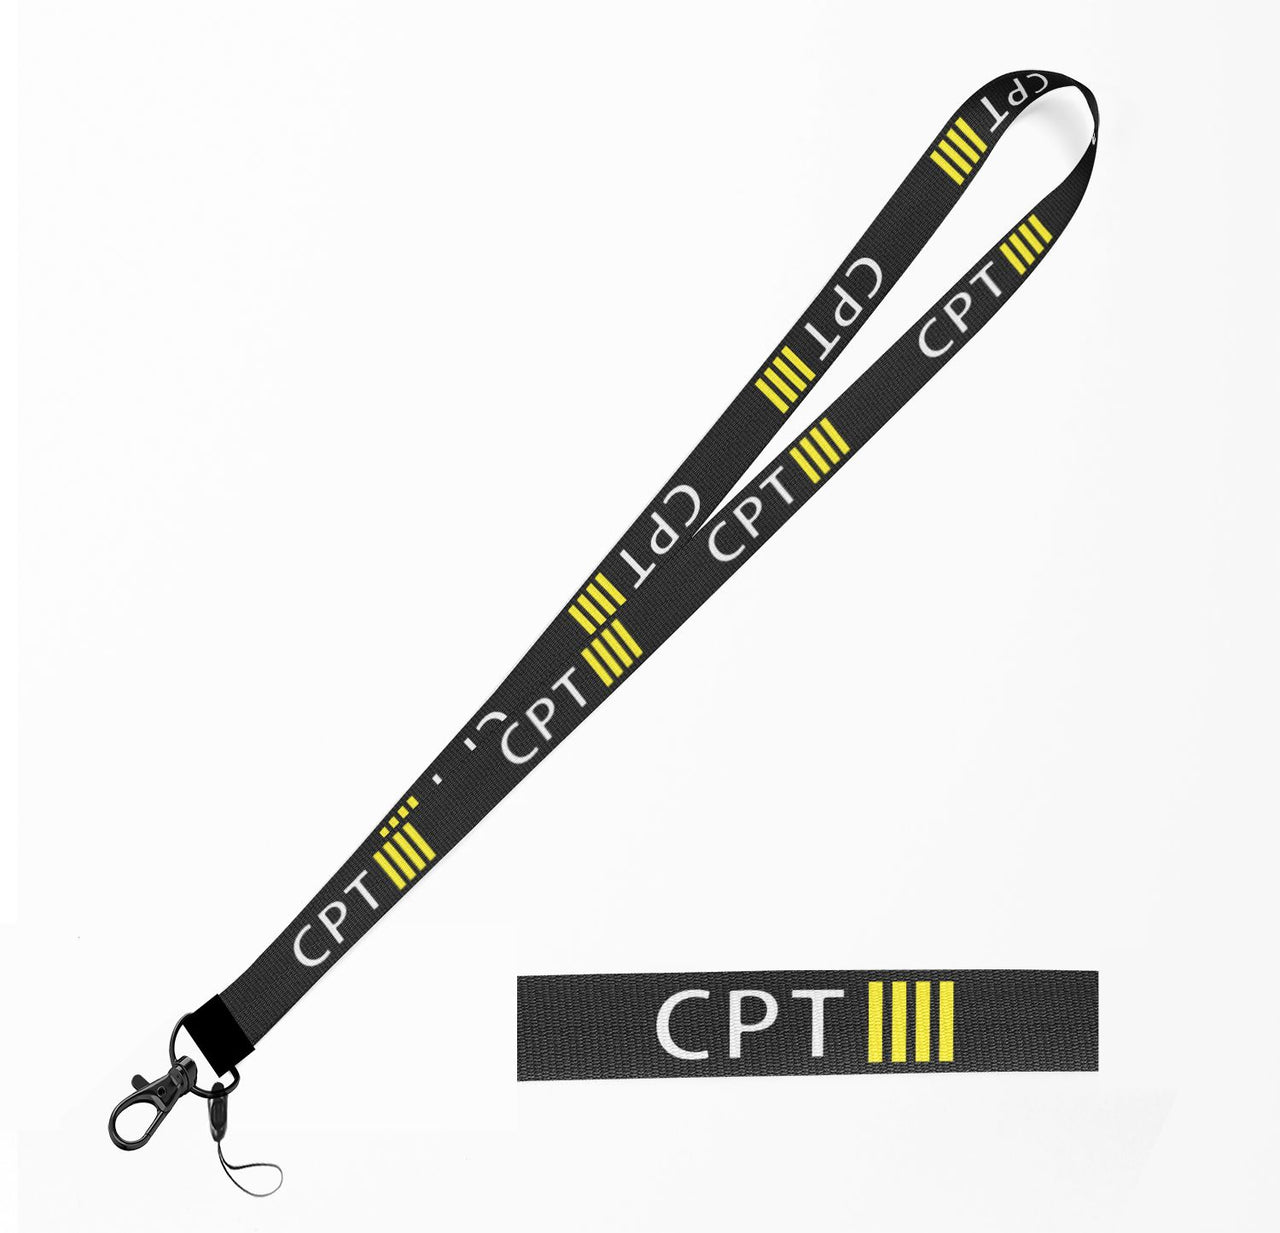 CPT & 4 Lines Designed Lanyard & ID Holders